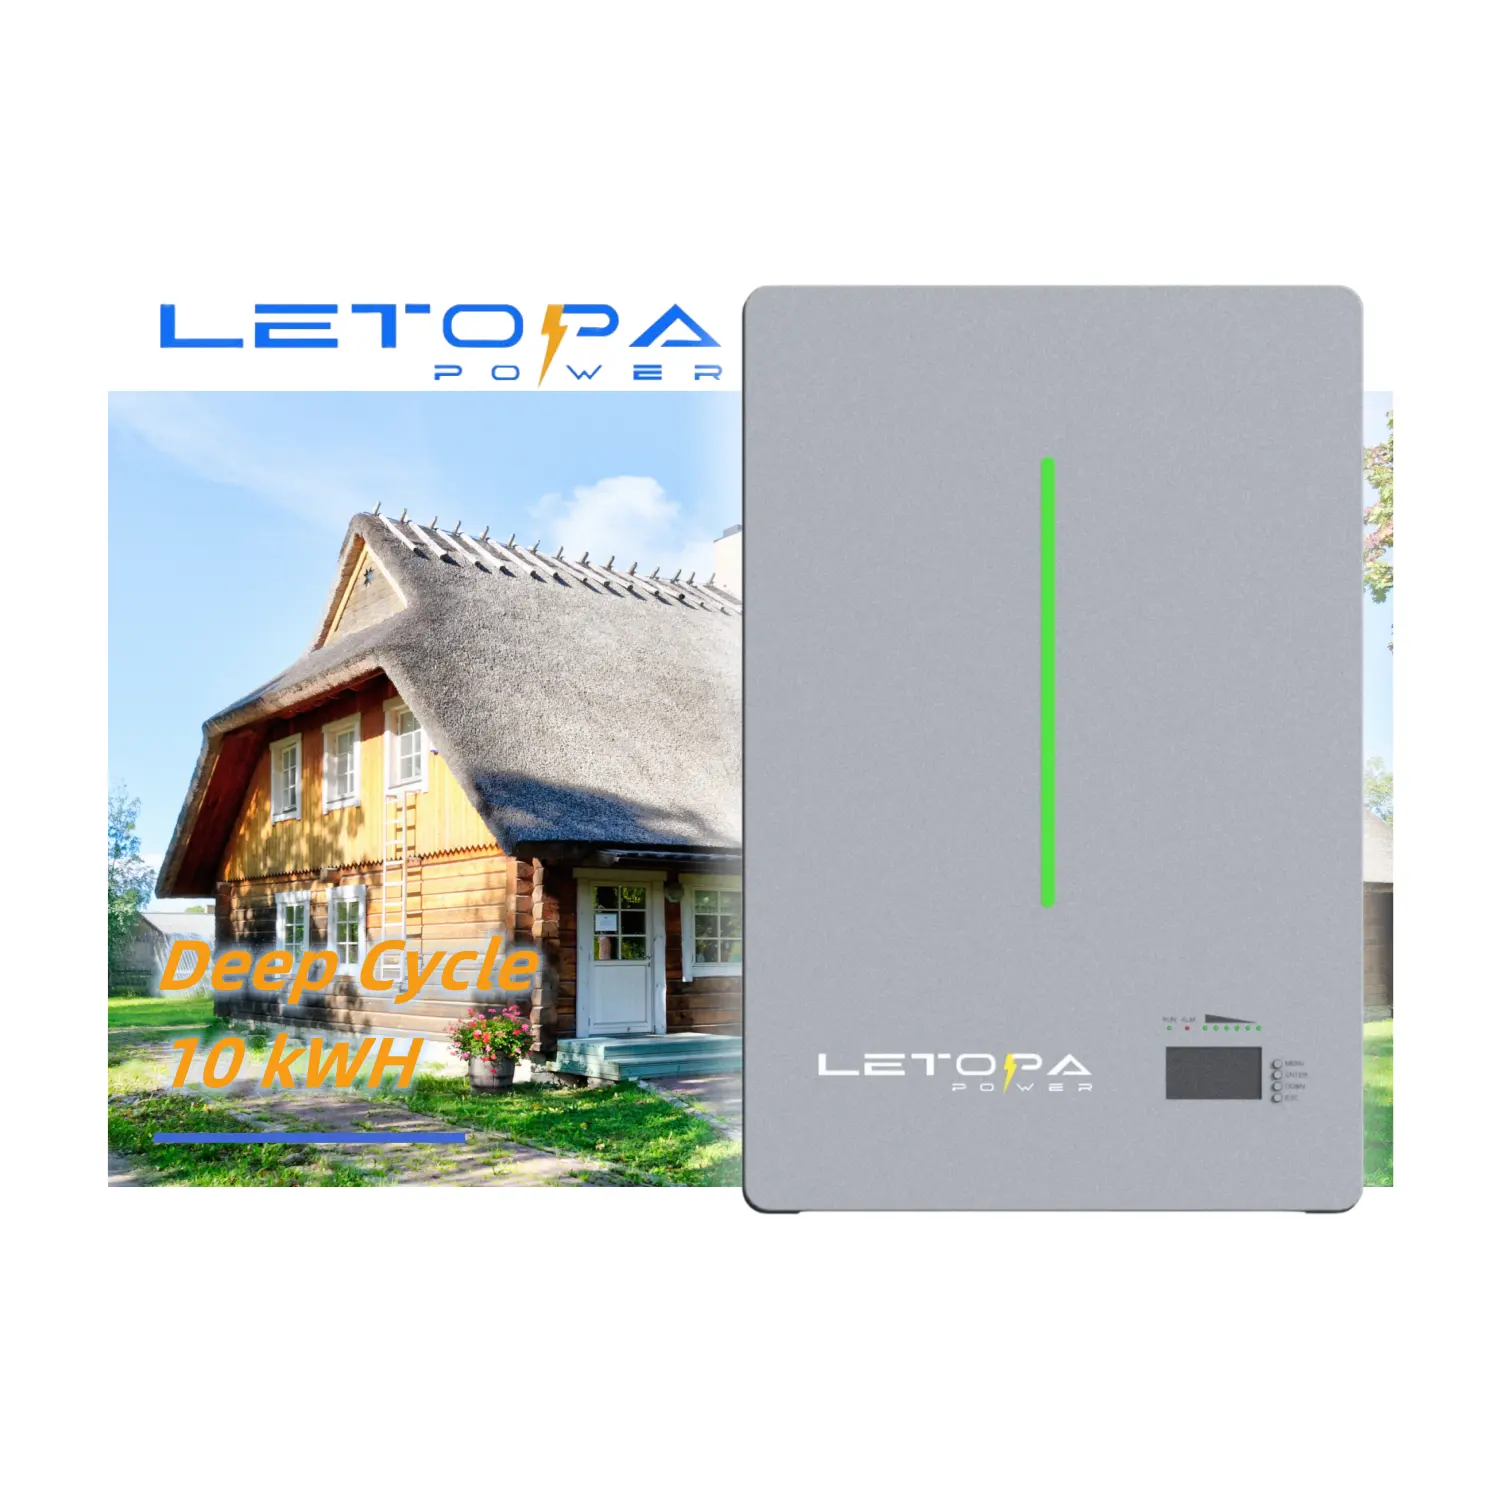 LETOPA 6000 Smart Deep Cycle Power Wall 10KWH LiFePO4 Lithium Battery 48V 200Ah Solar Energy Storage Battery Home Energy Storage